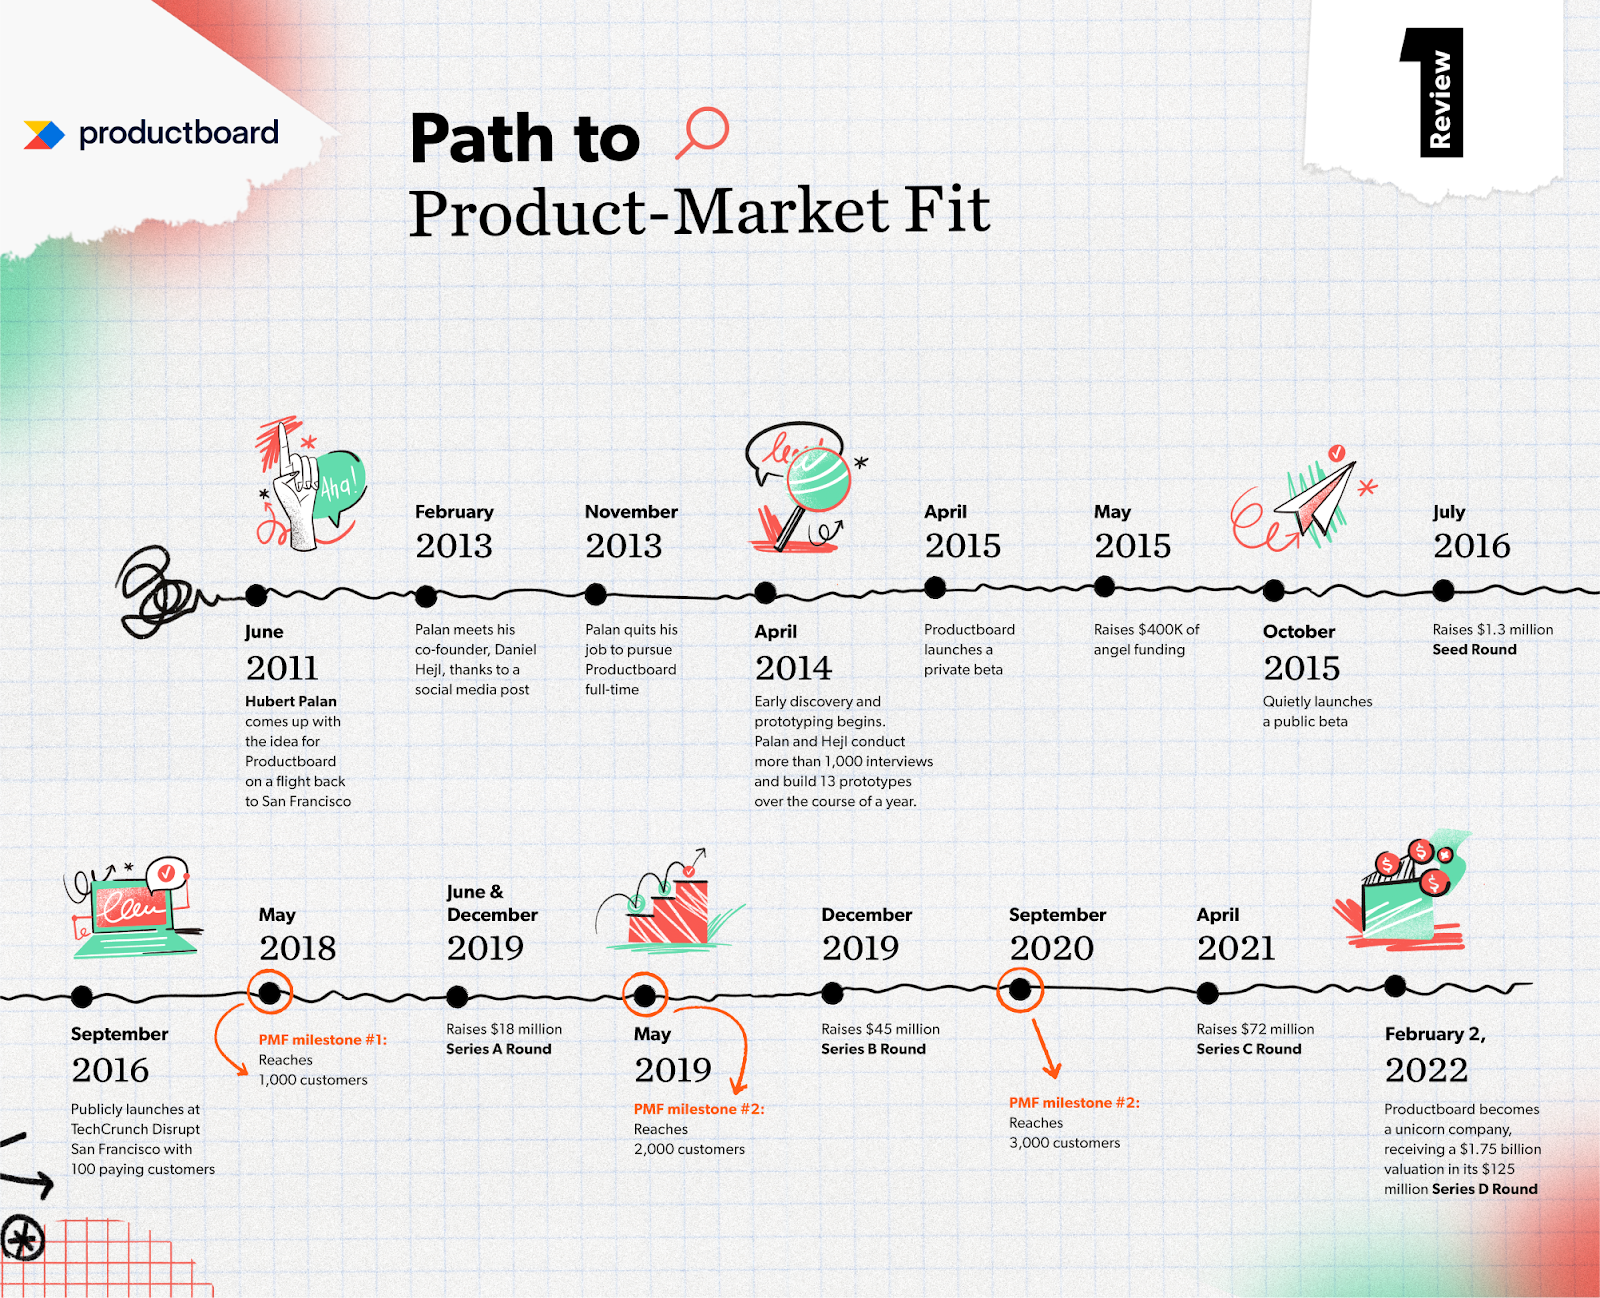 Productboard's path to PMF